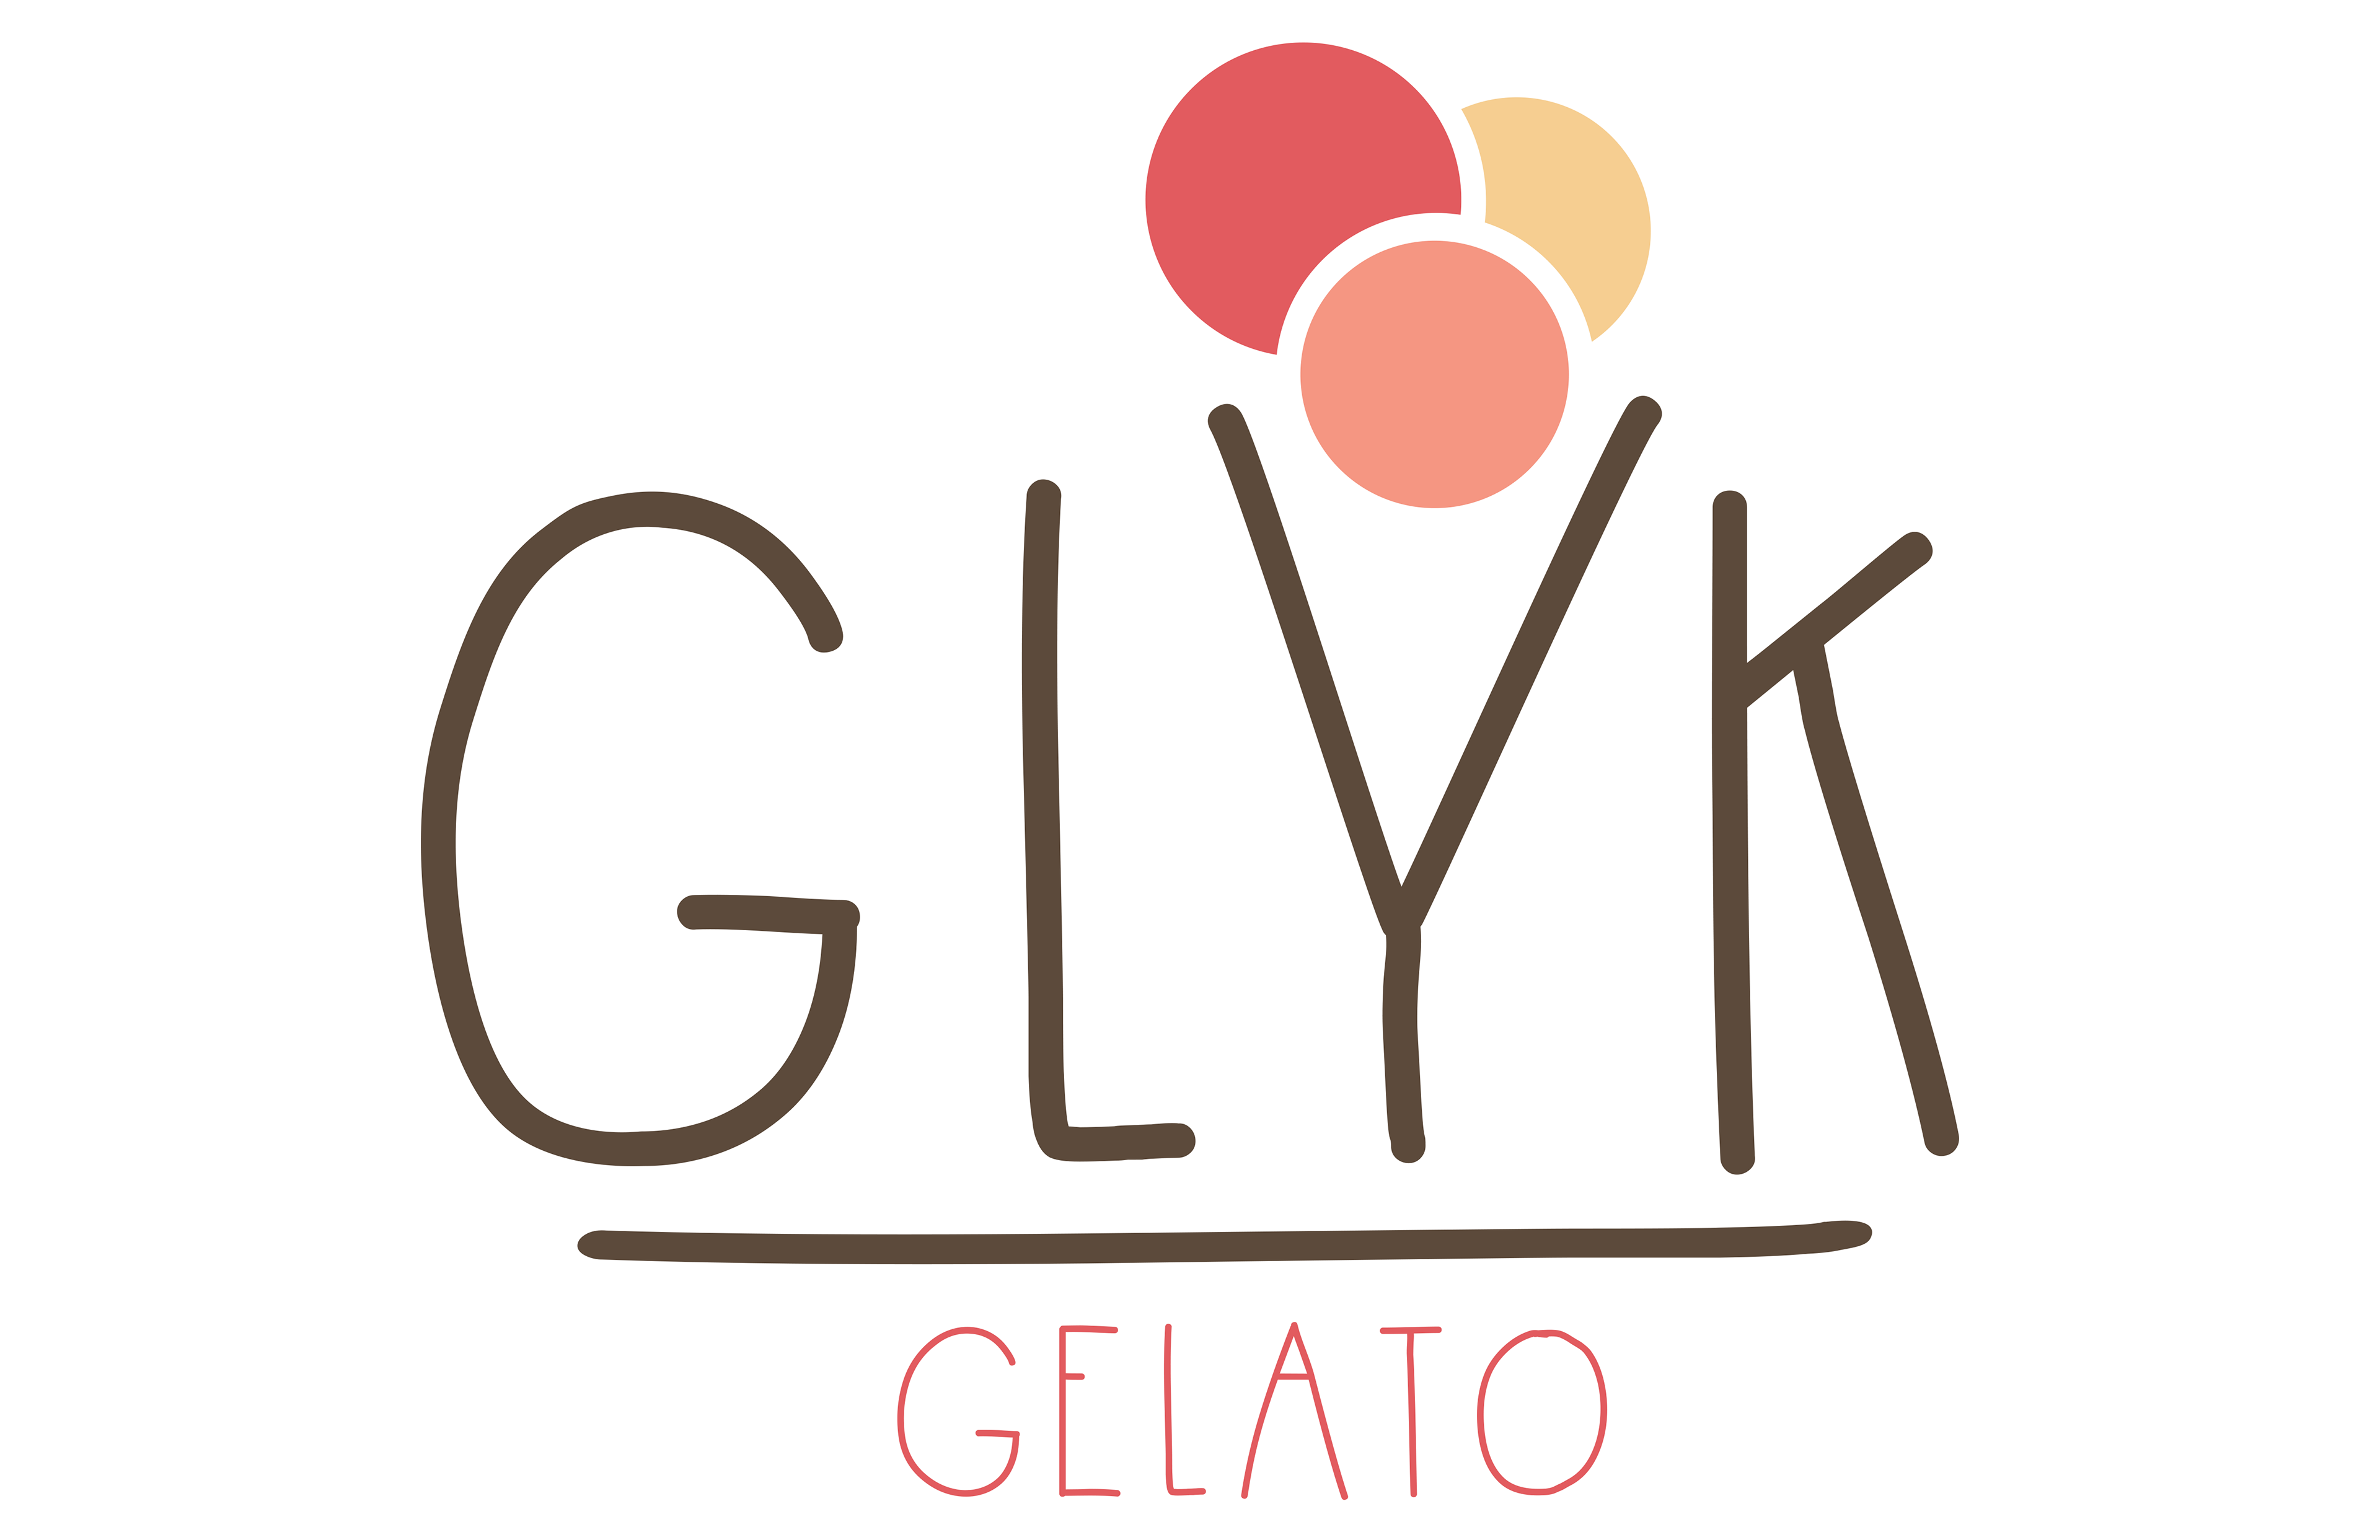 Review: Glyk gelato worth the price